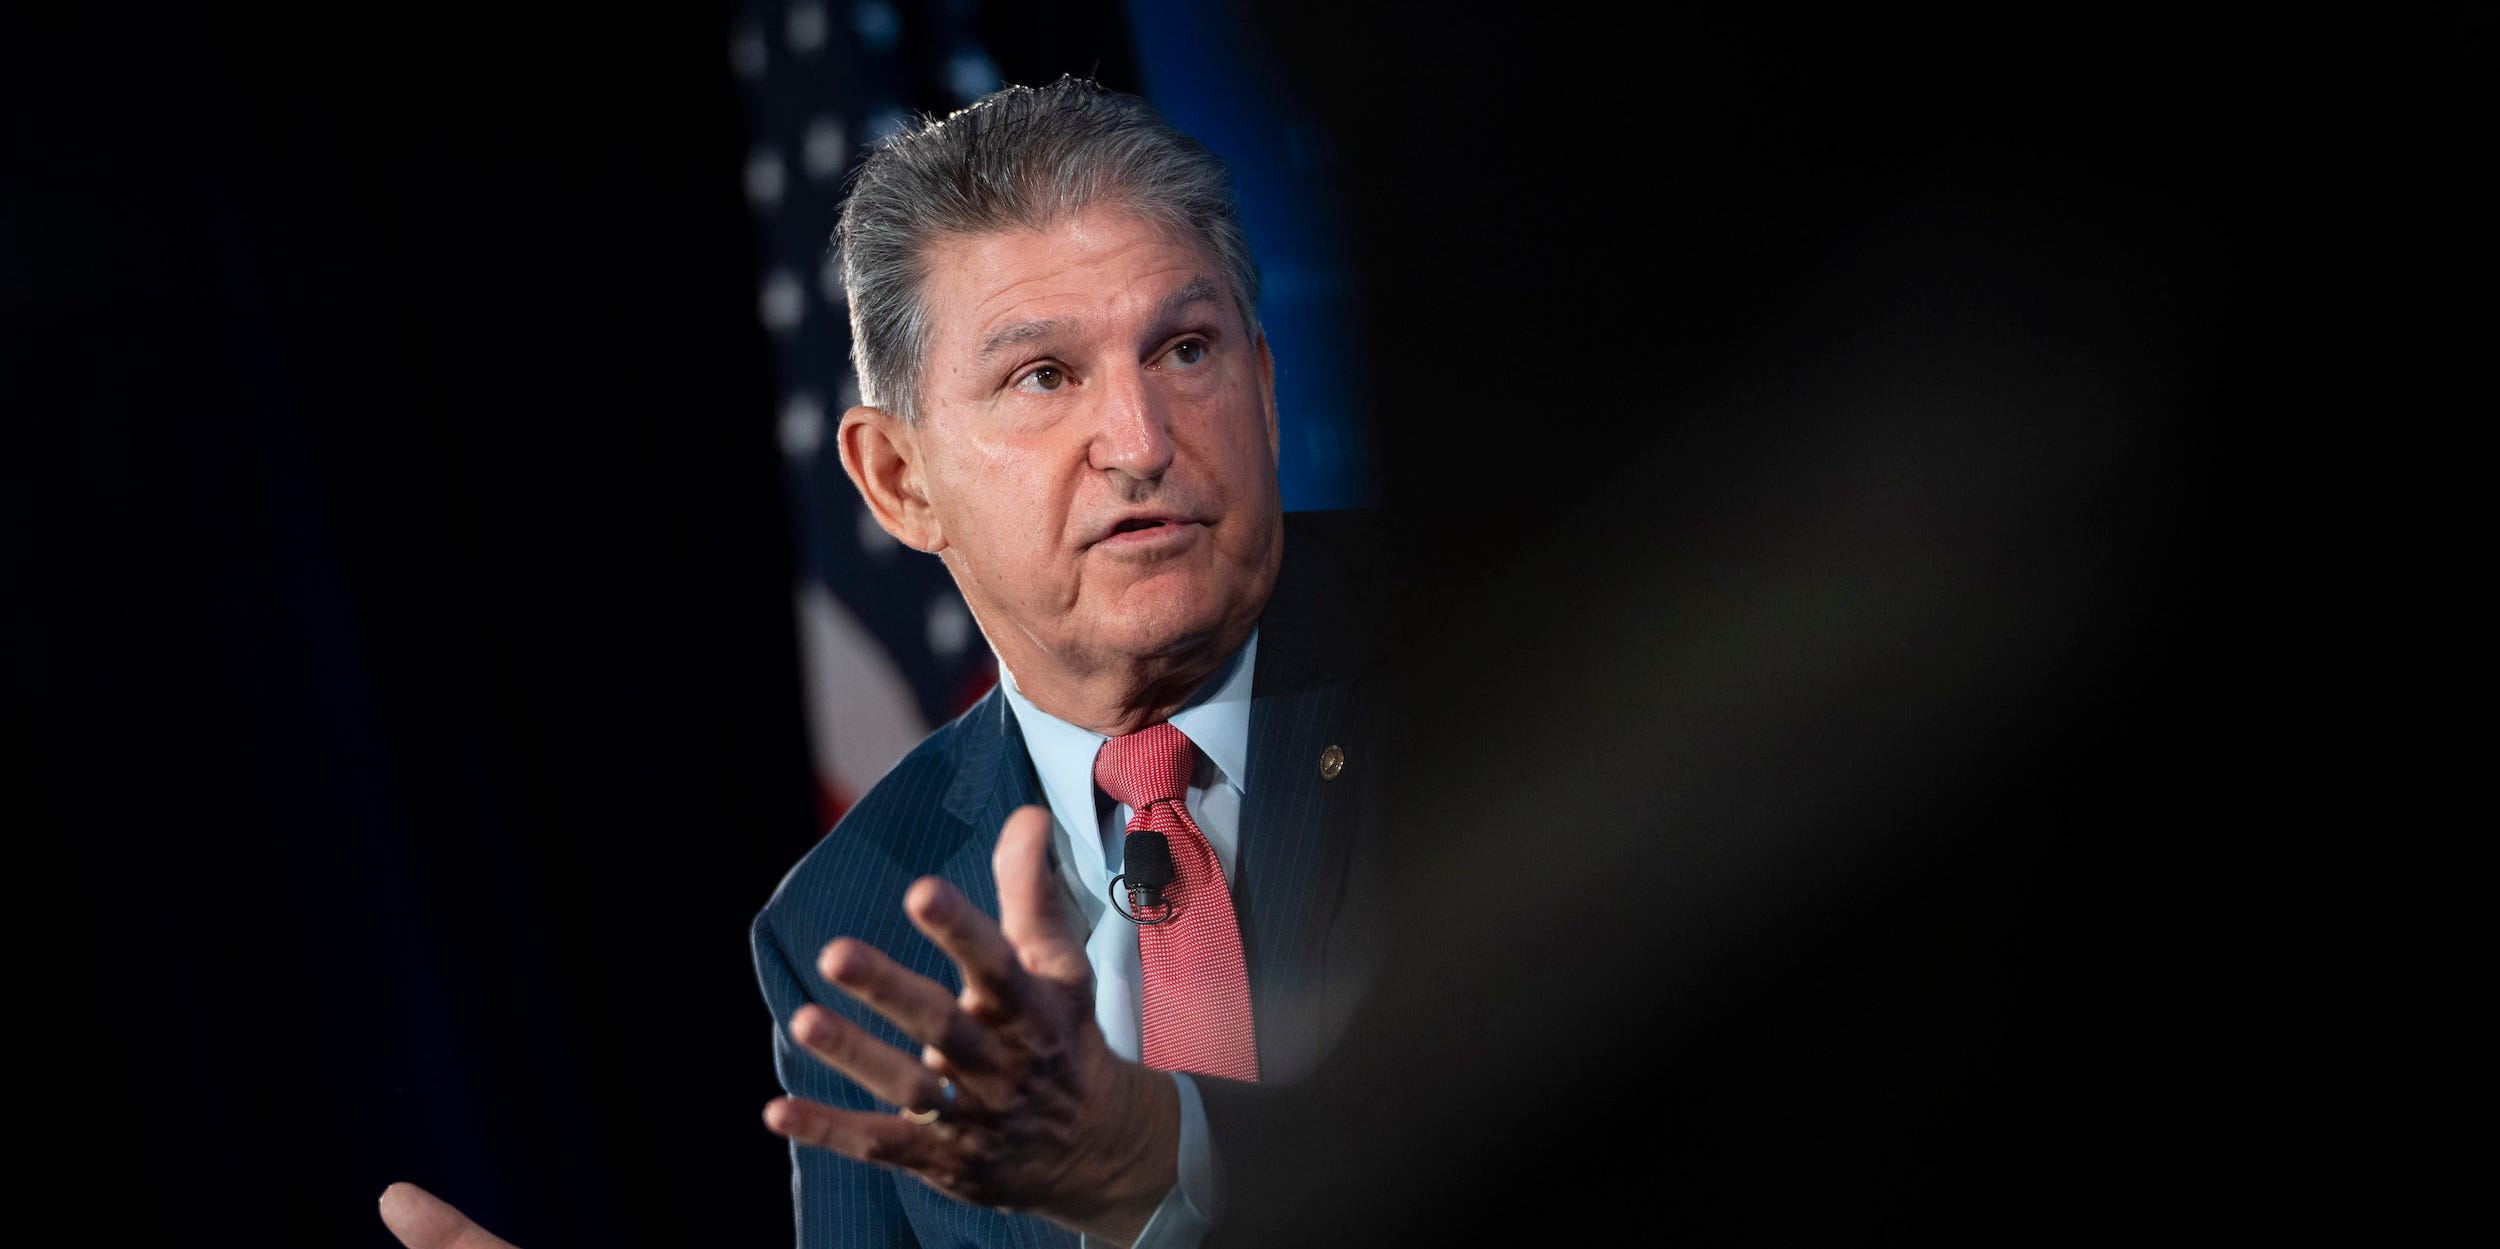 Senator Joe Manchin gestures in front of an American flag with his palms up, the right half of the photo is blurred out in black.